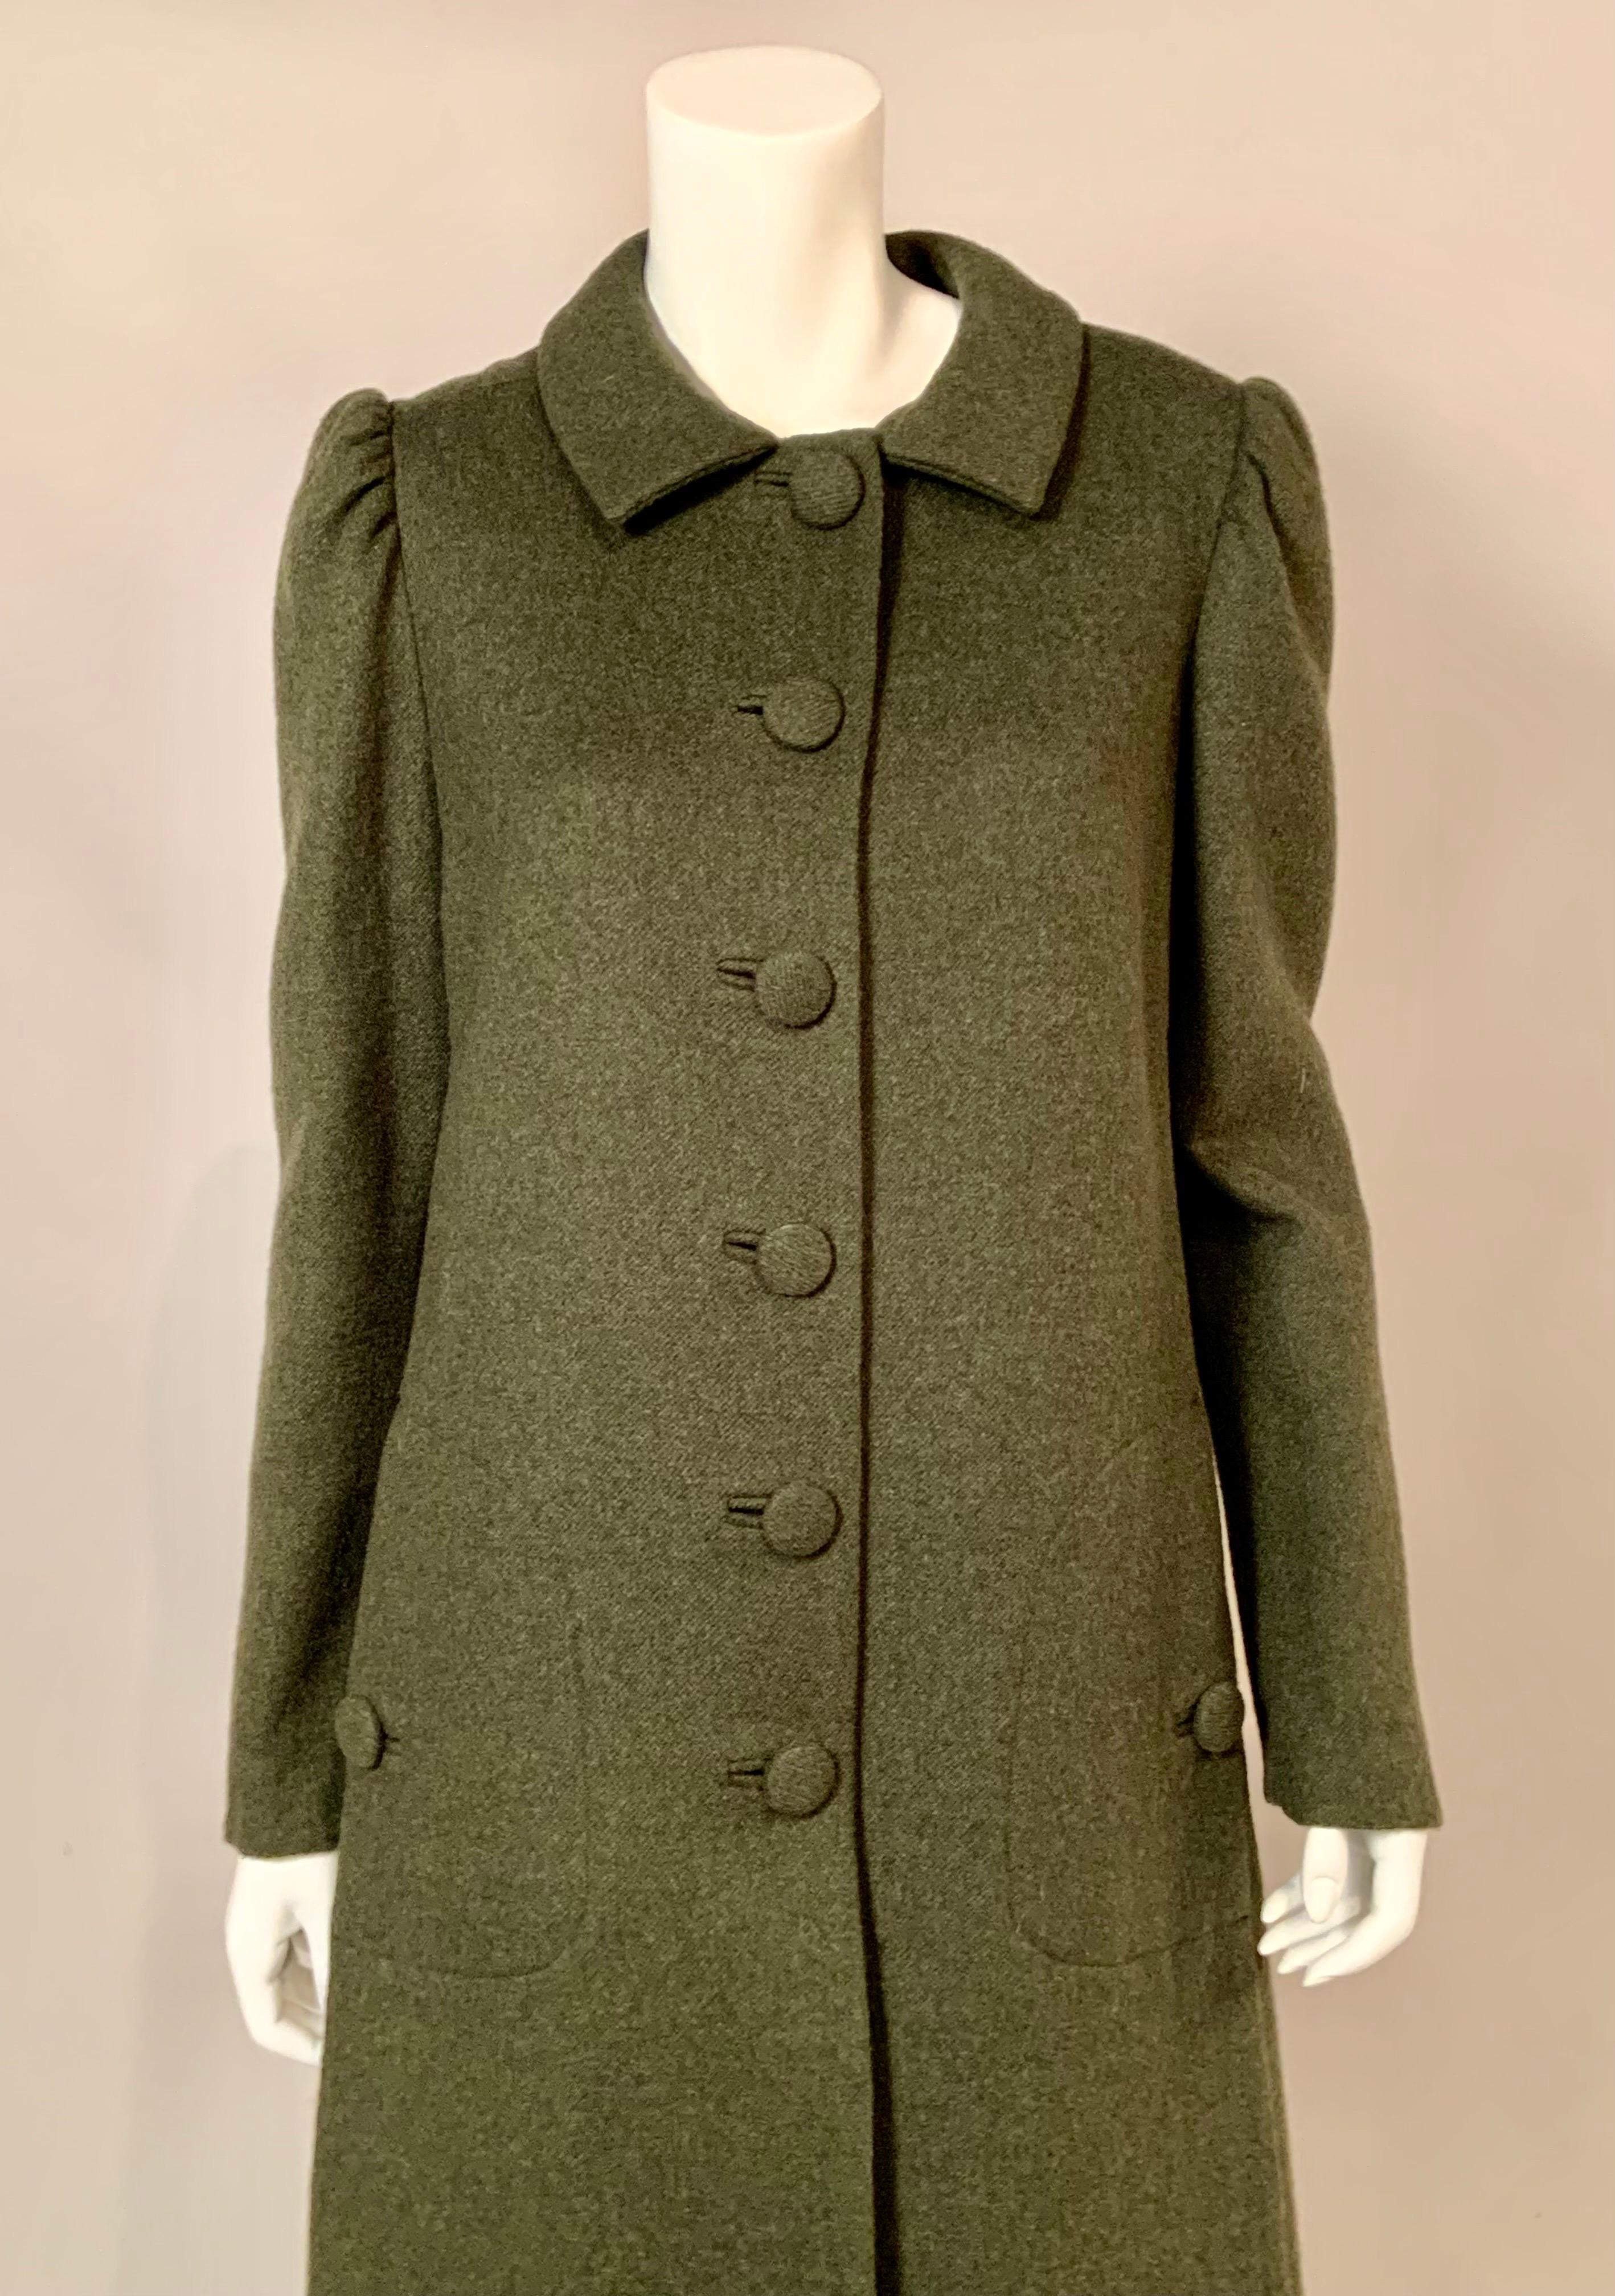 Sybil Connolly Irish Couture Double Faced Loden Green and Plaid Wool Coat In Excellent Condition For Sale In New Hope, PA